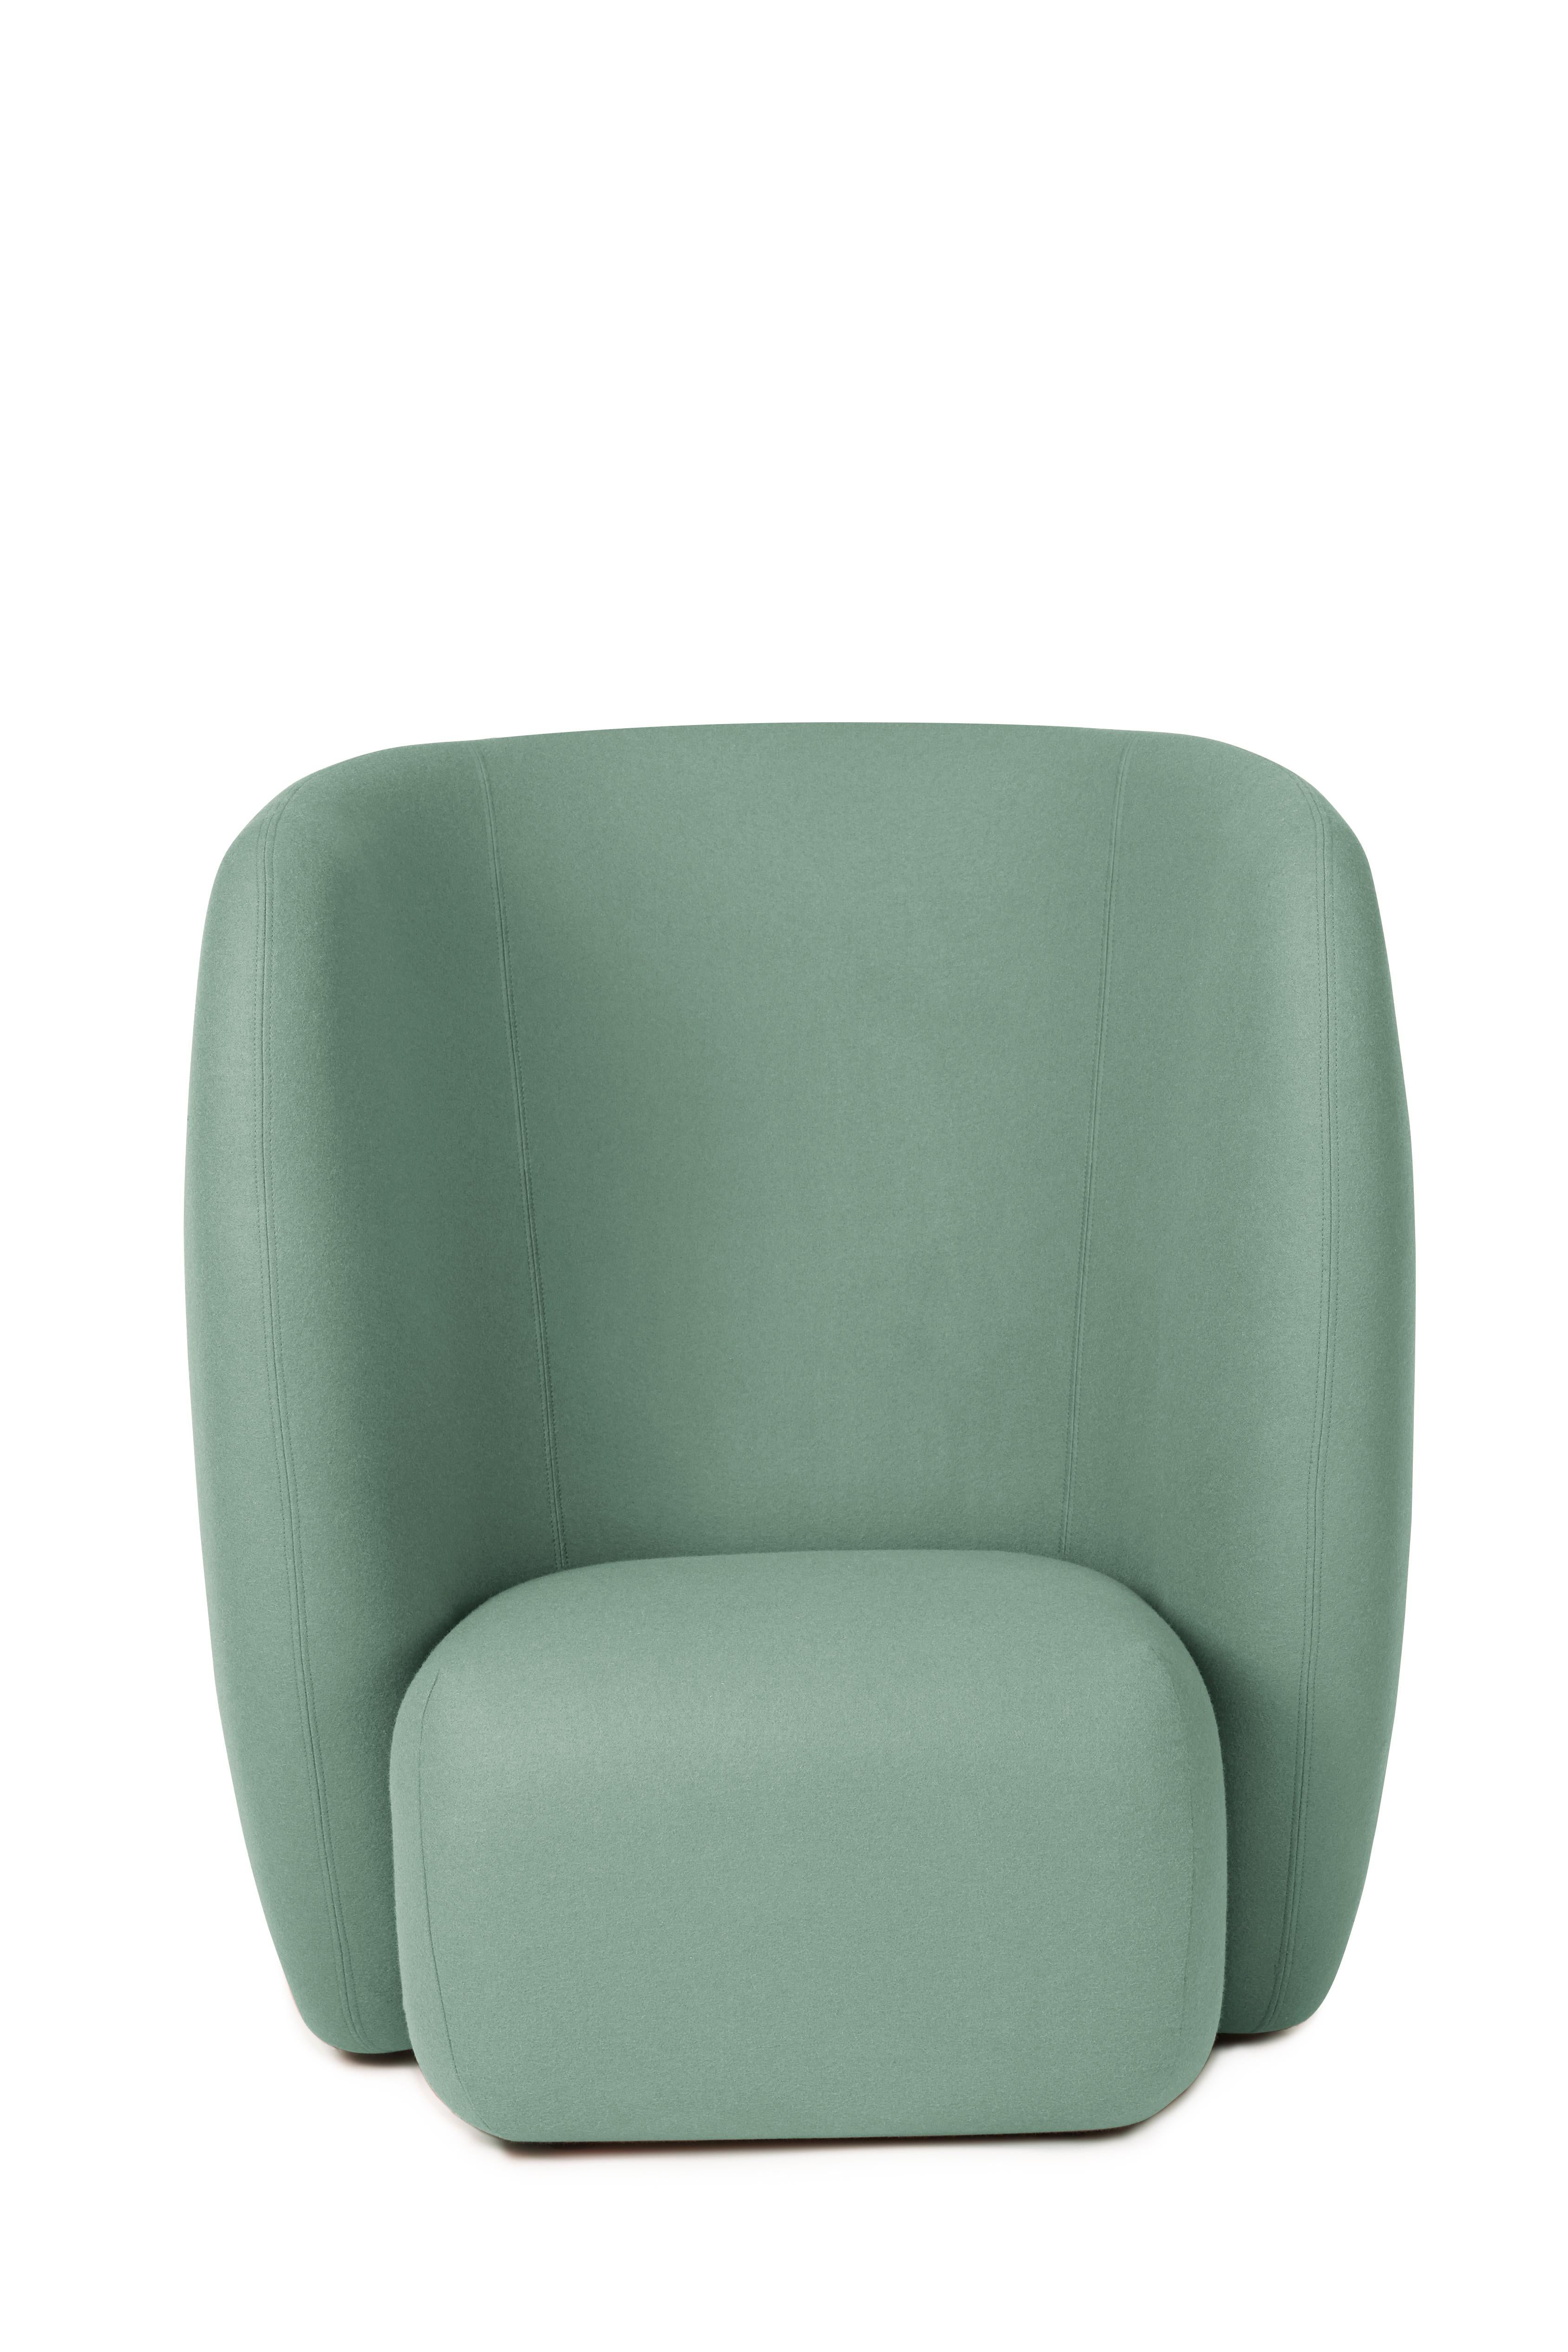 For Sale: Blue (Hero 931) Haven Lounge Chair, by Charlotte Høncke from Warm Nordic